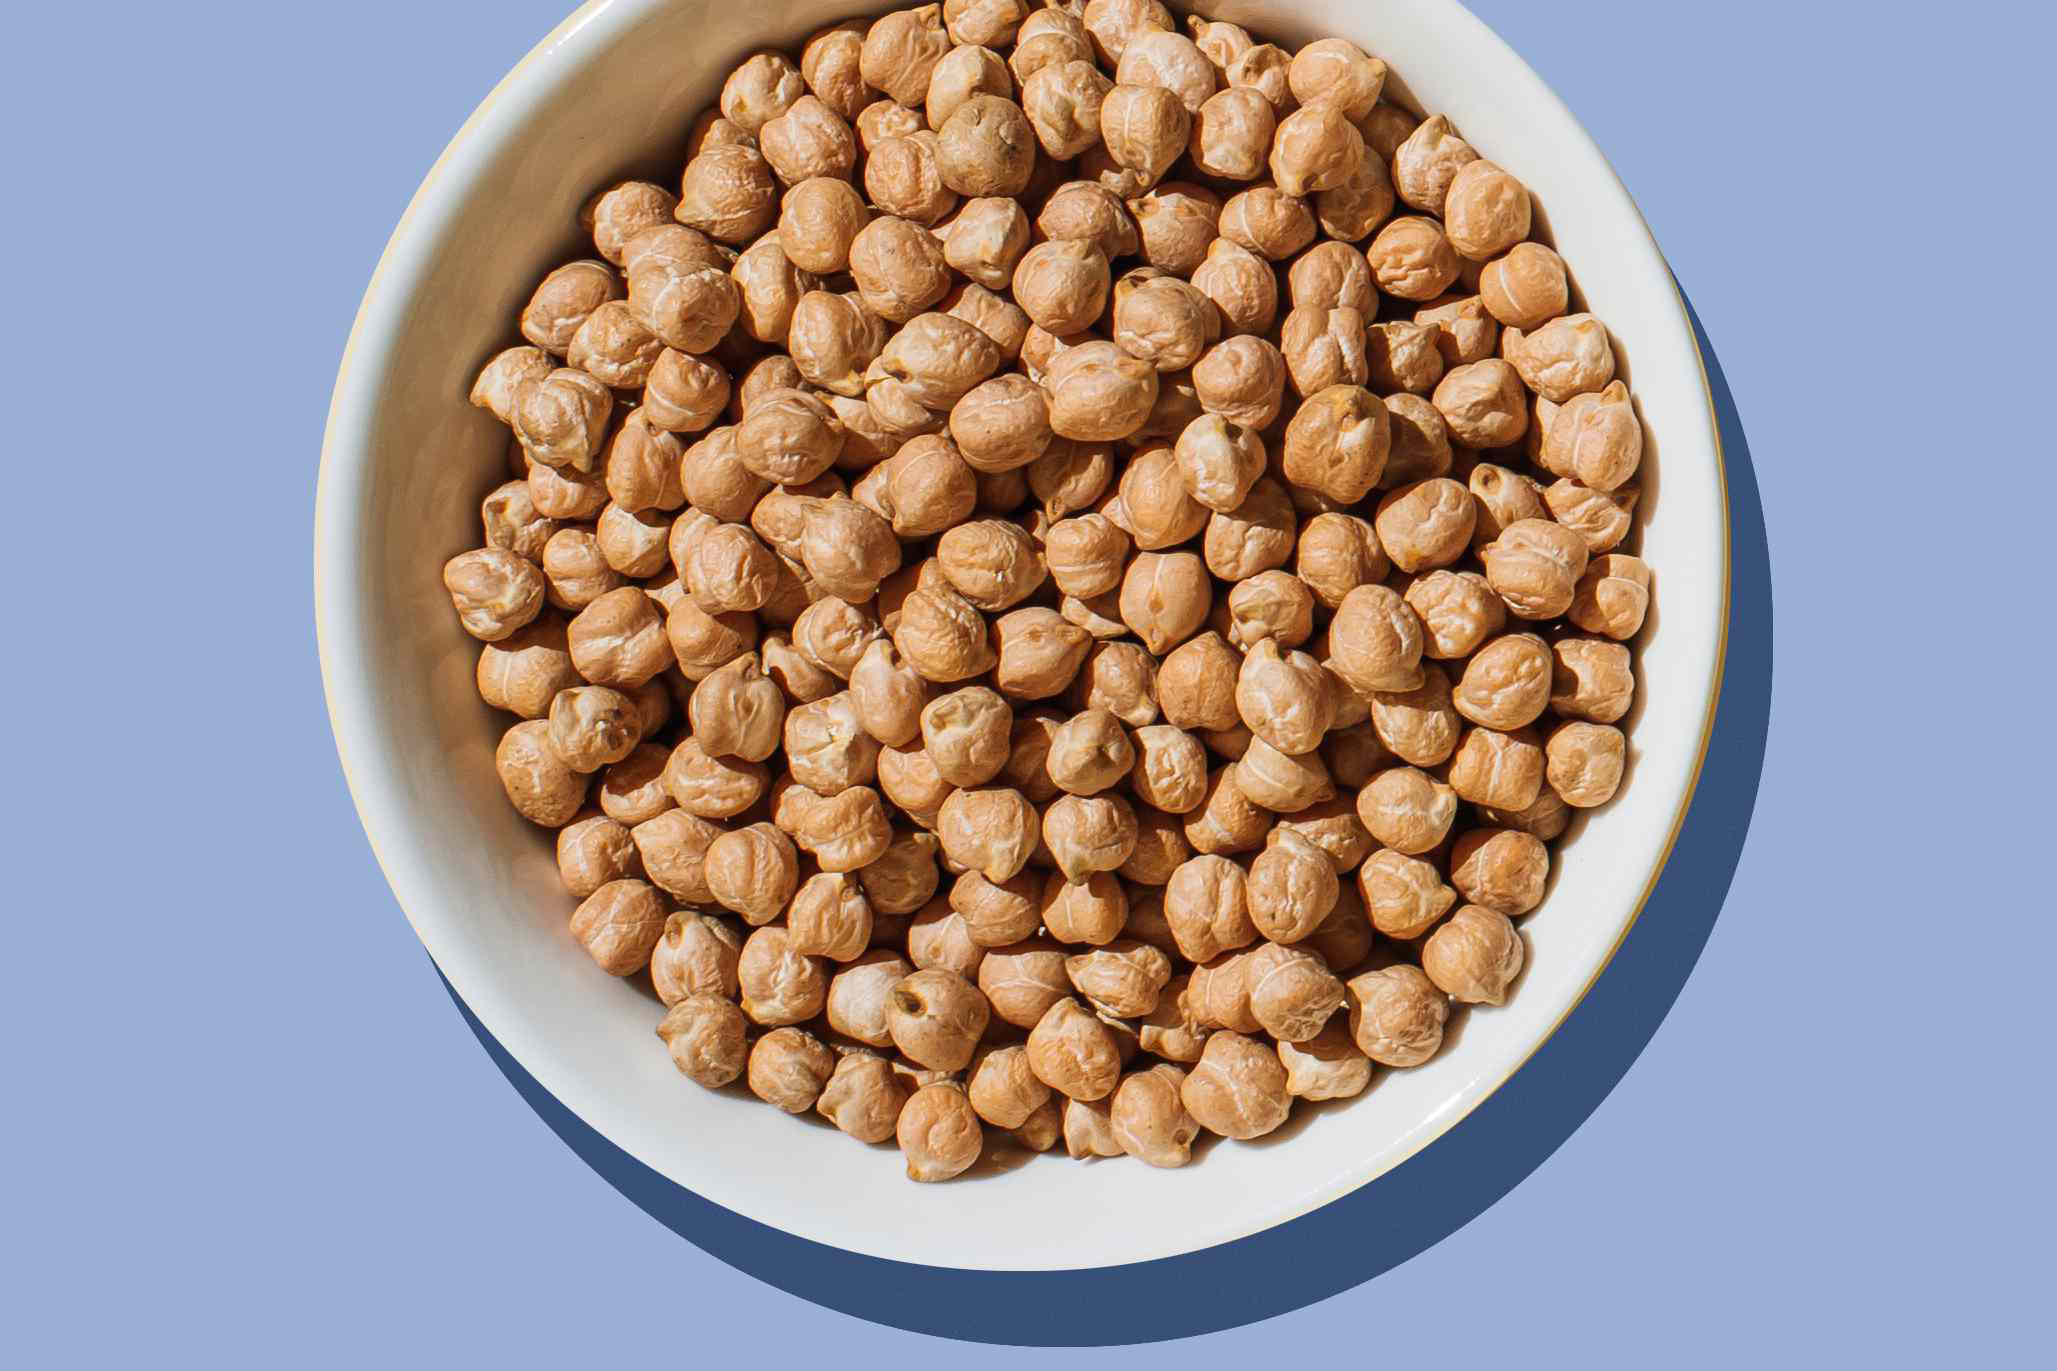 Chickpeas vs. Garbanzo Beans—What's the Difference?